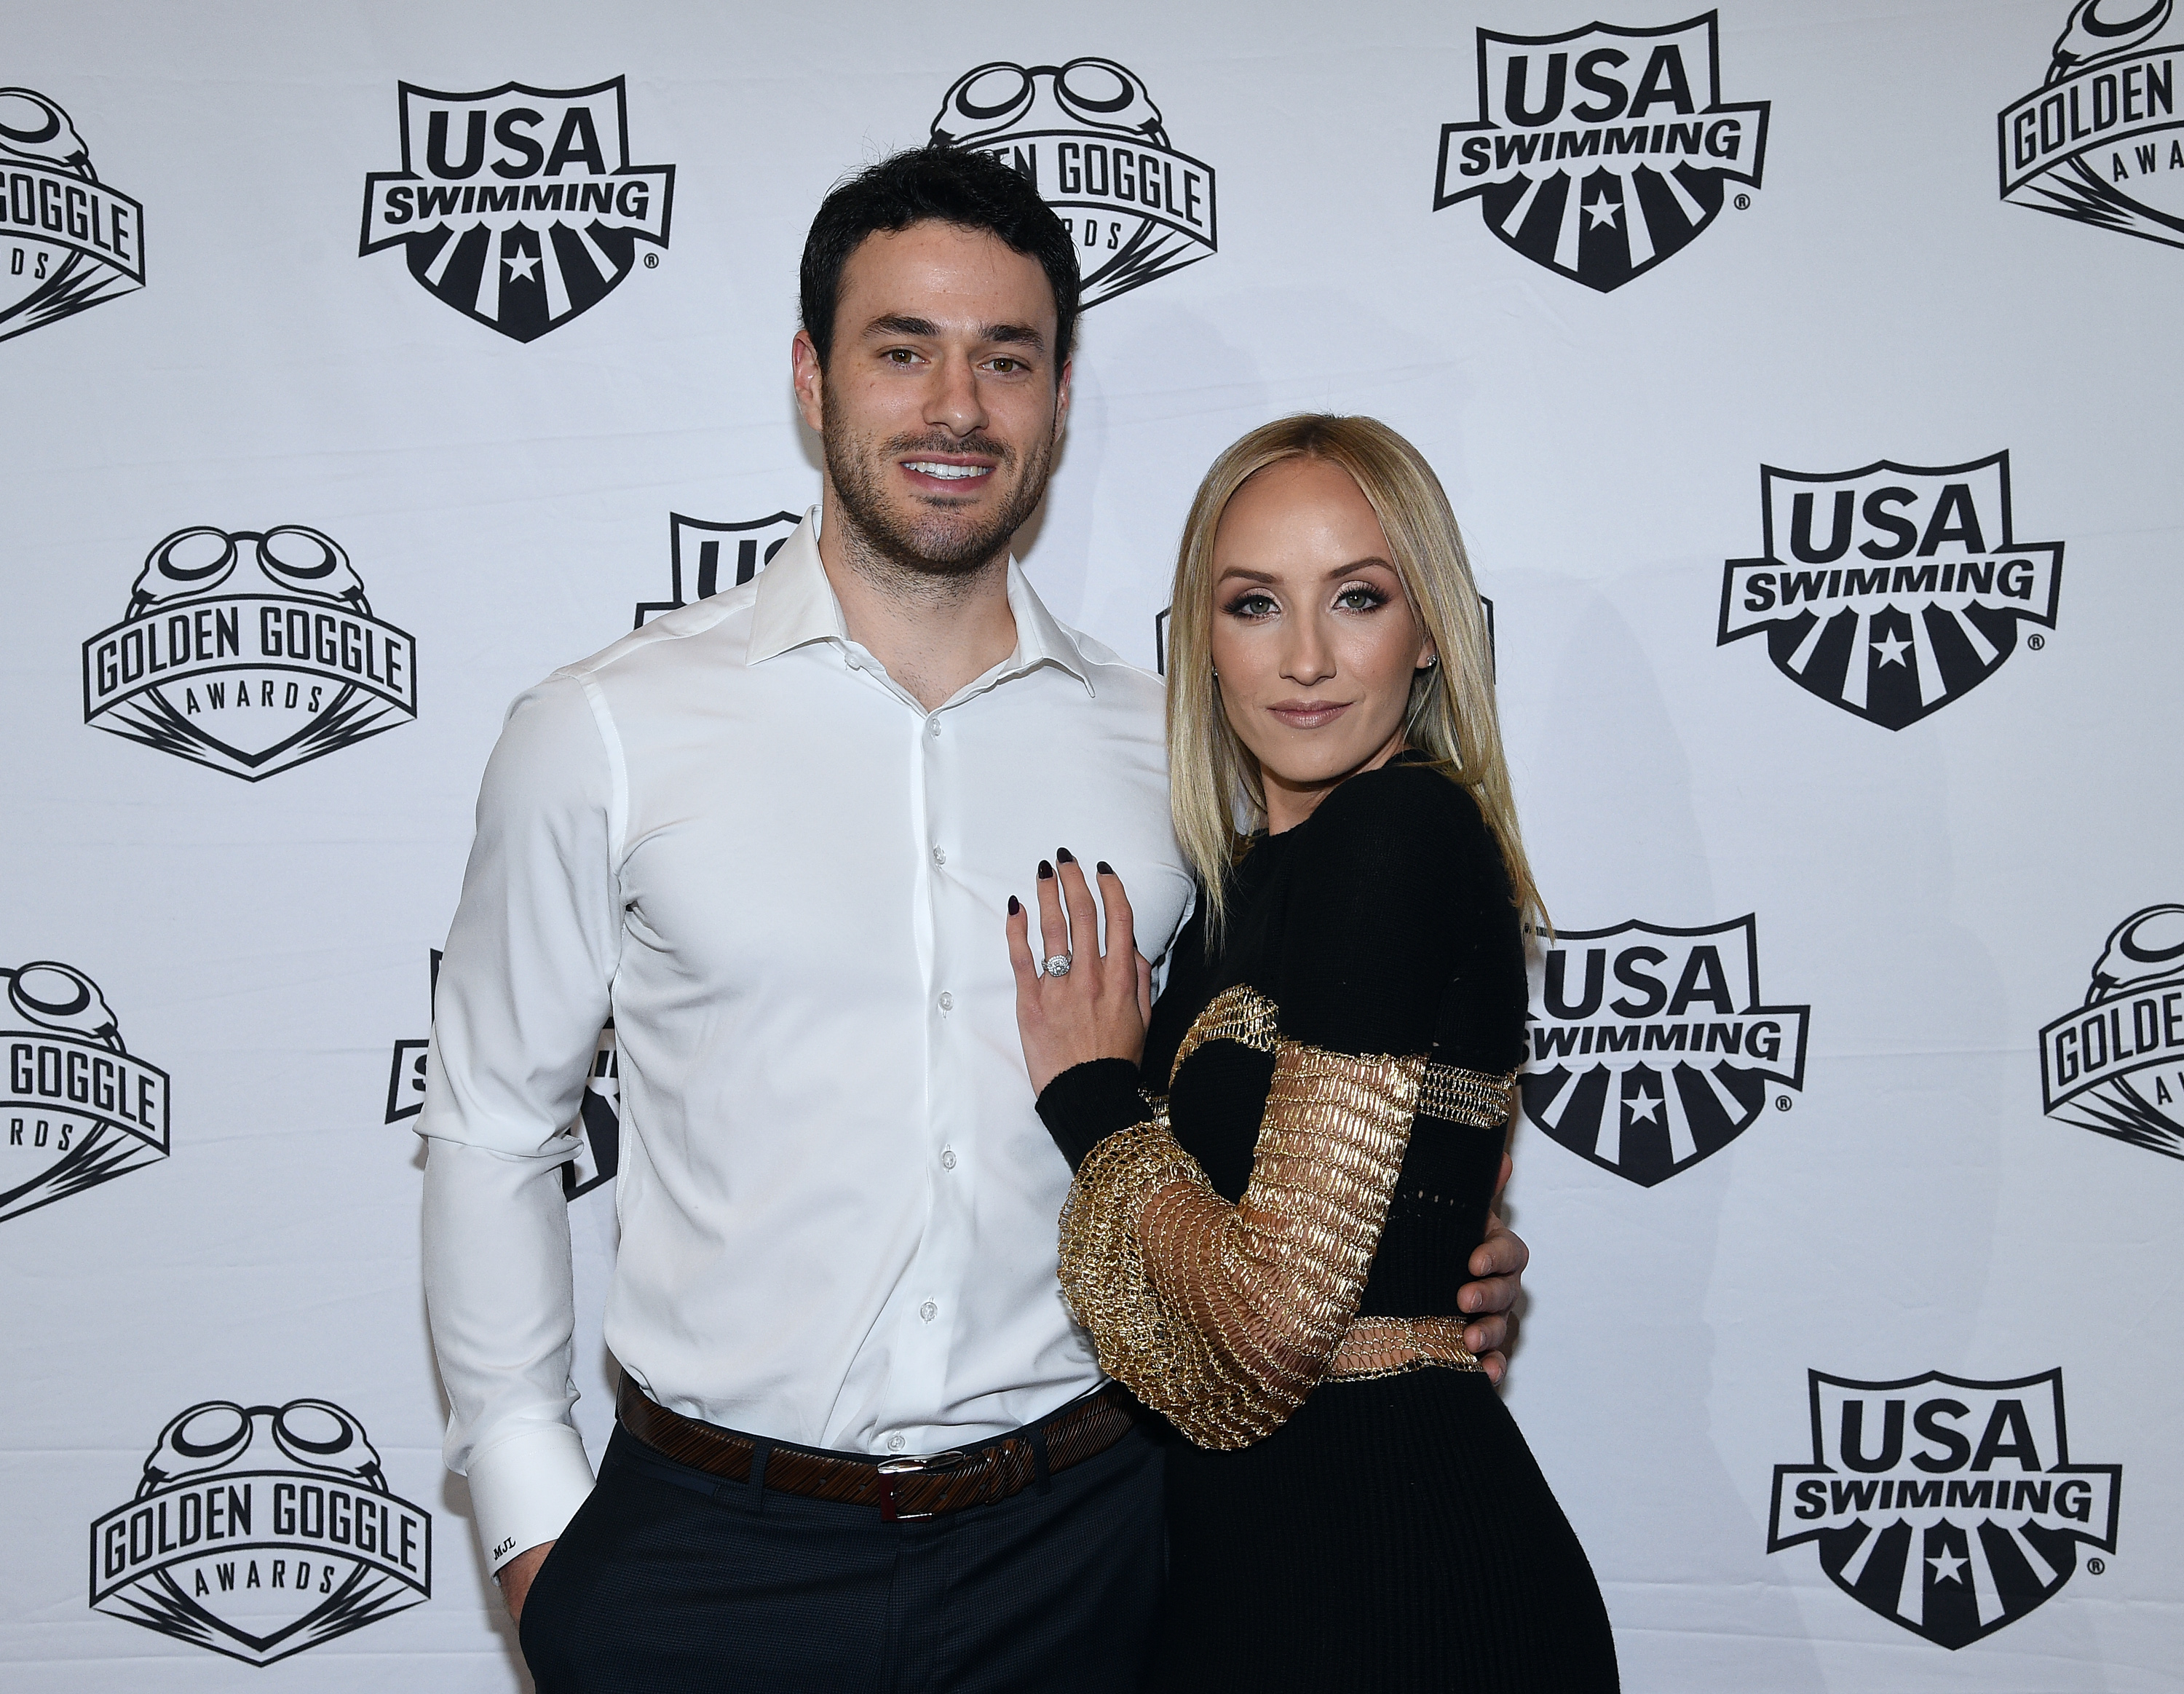 Matt Lombardi and Nastia Liukin attend the 2017 USA Swimming Golden Goggle Awards at J.W. Marriott at L.A. Live on November 19, 2017, in Los Angeles, California. | Source: Getty Images